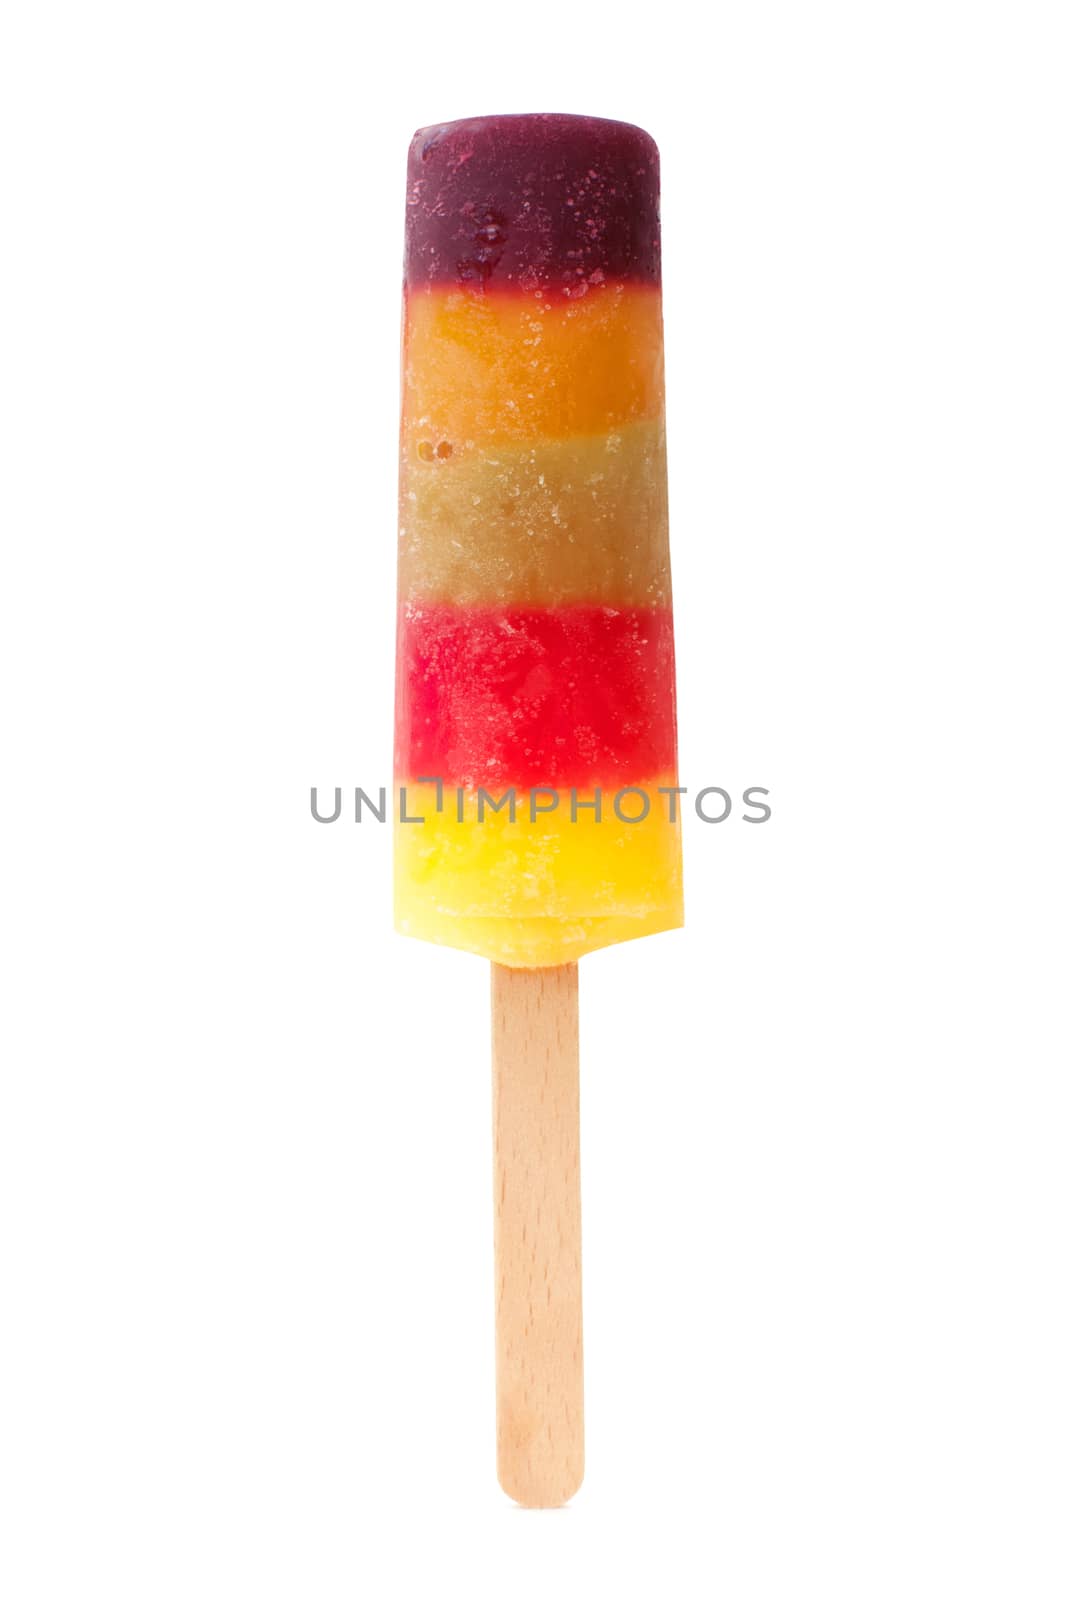 Ice lolly popsicle over a white background